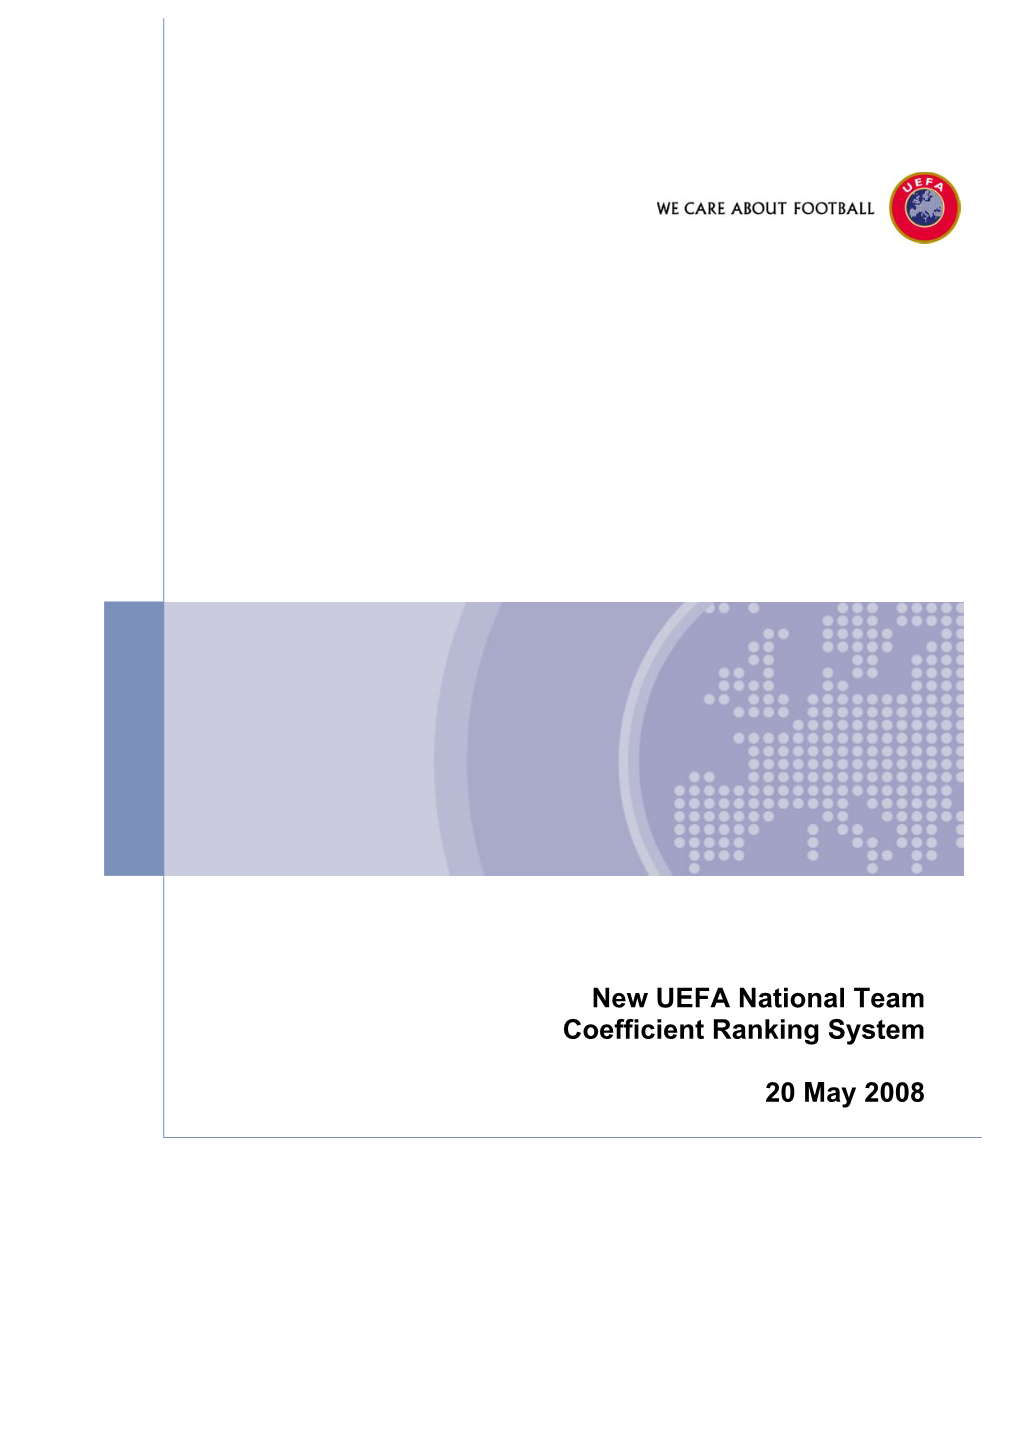 New UEFA National Team Coefficient Ranking System 20 May 2008